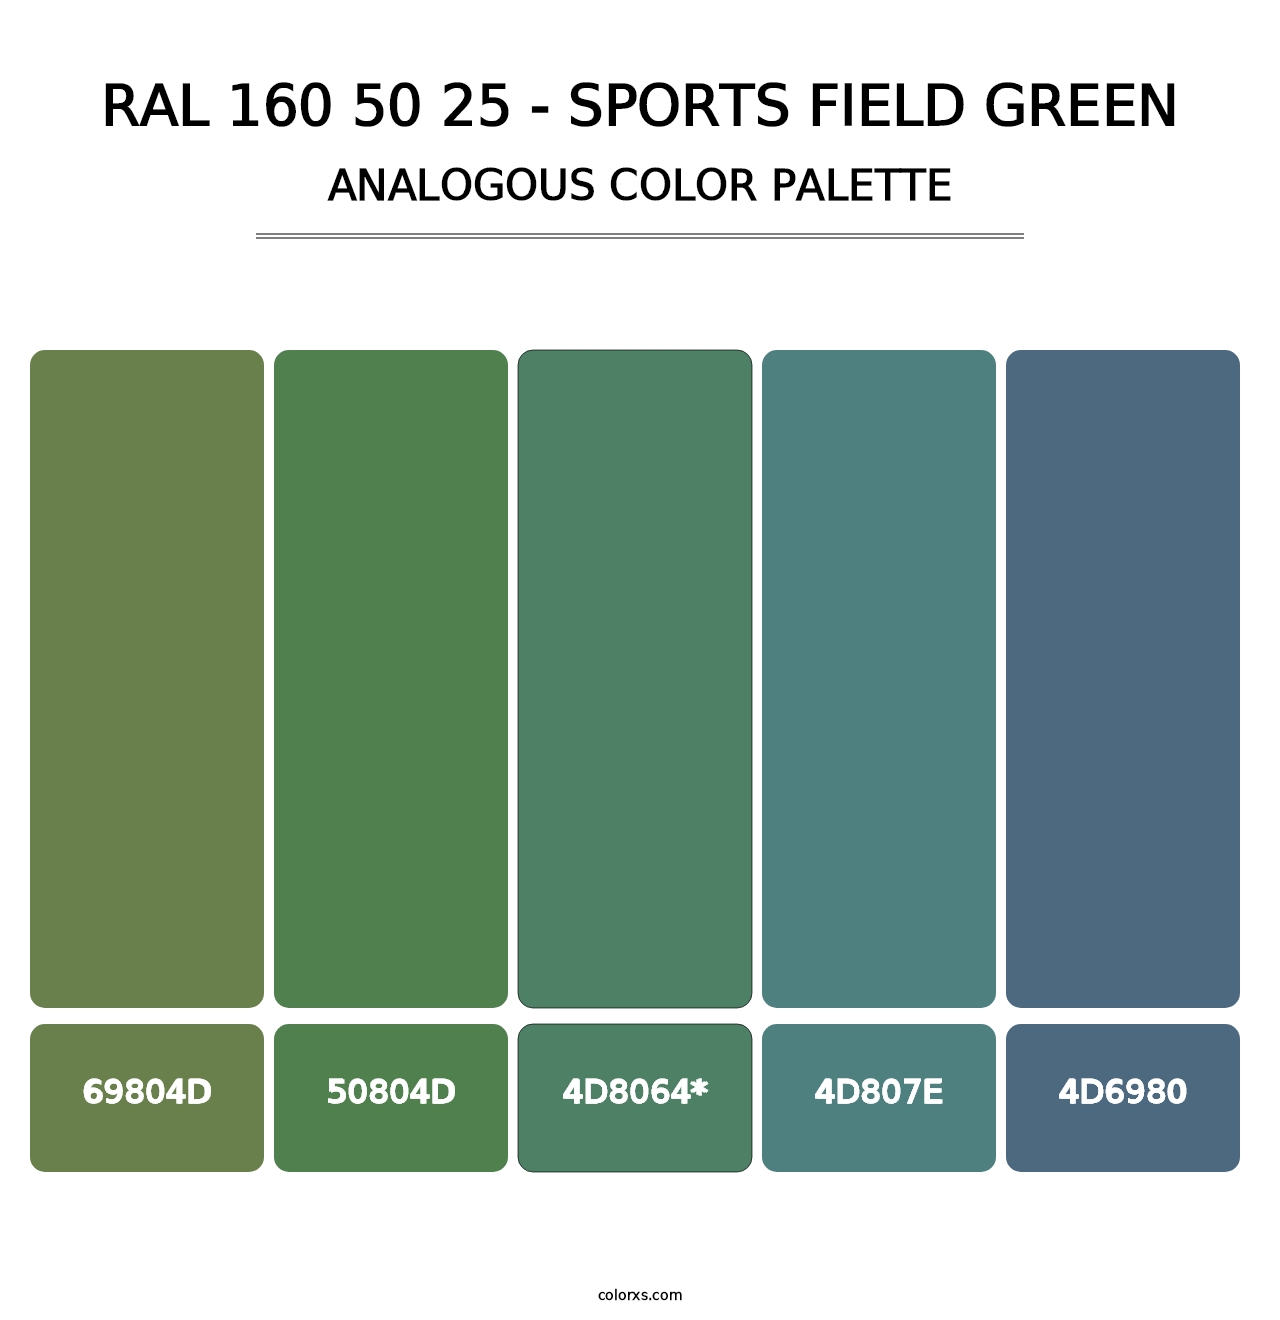 RAL 160 50 25 - Sports Field Green - Analogous Color Palette